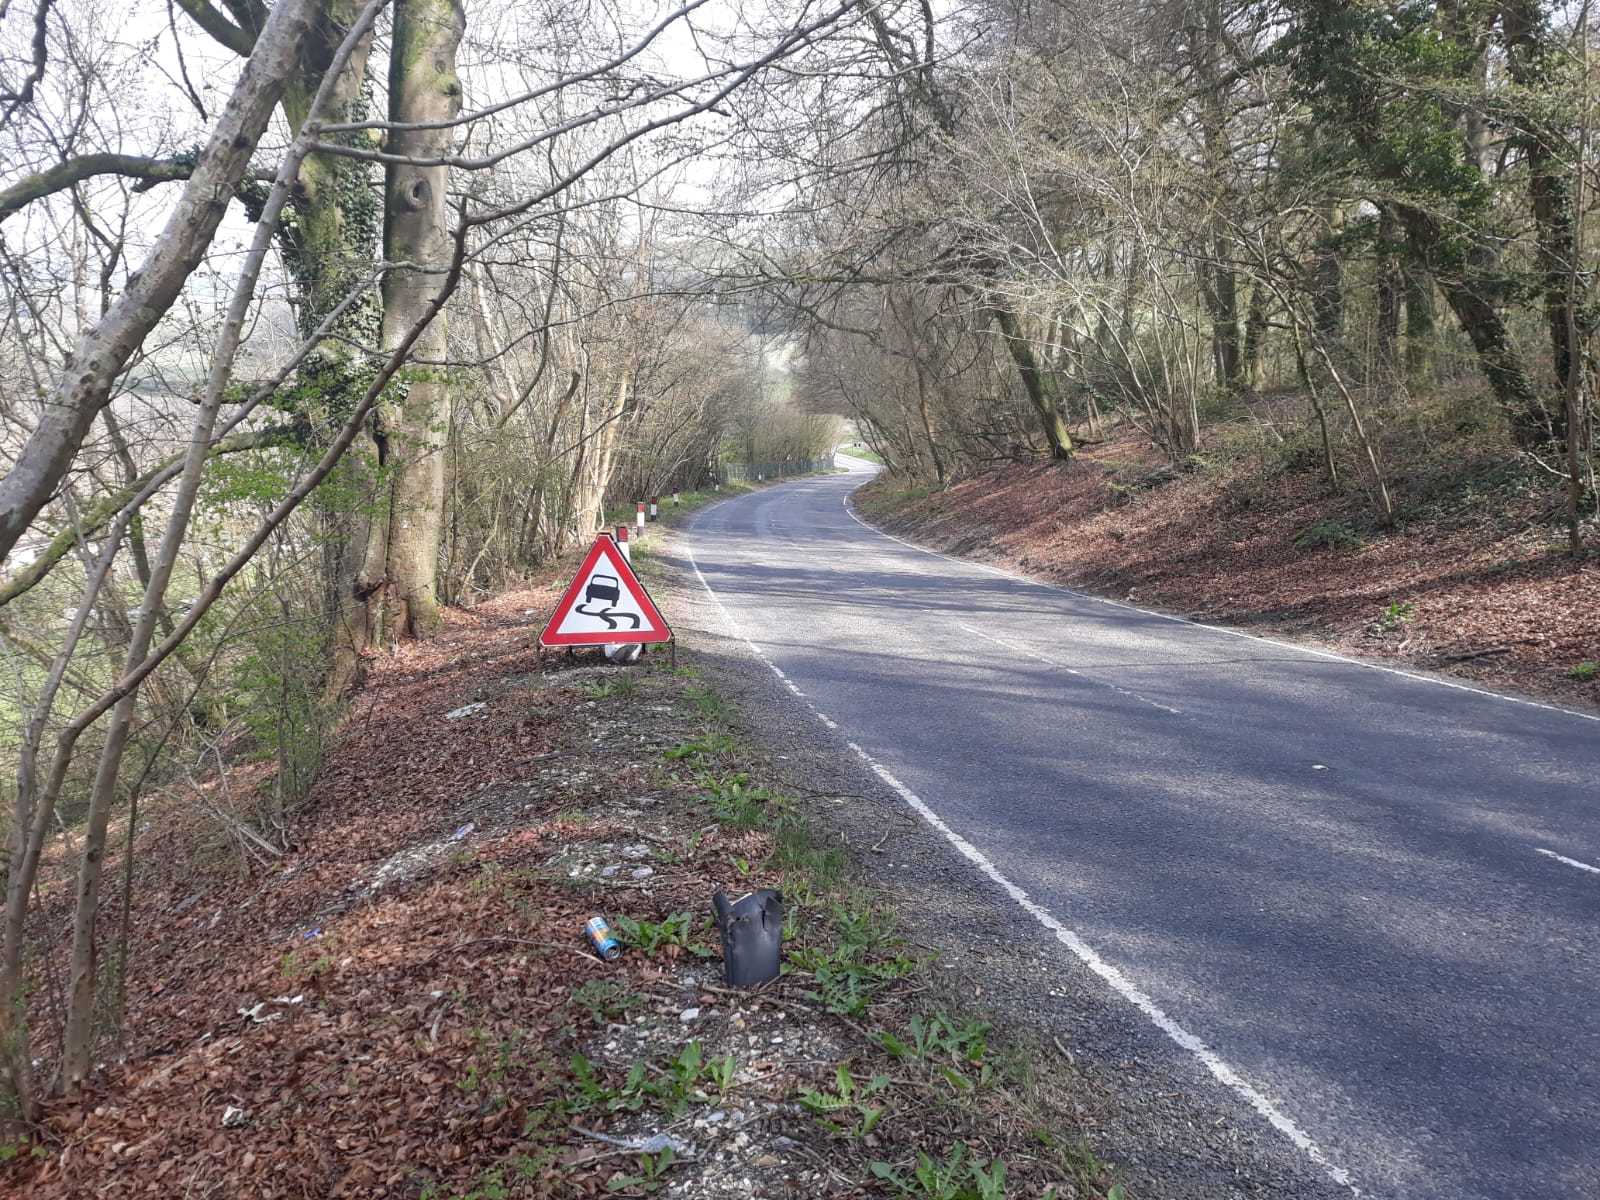 The scene where Alex Sartain crashed his motorbike on Doiley Hill